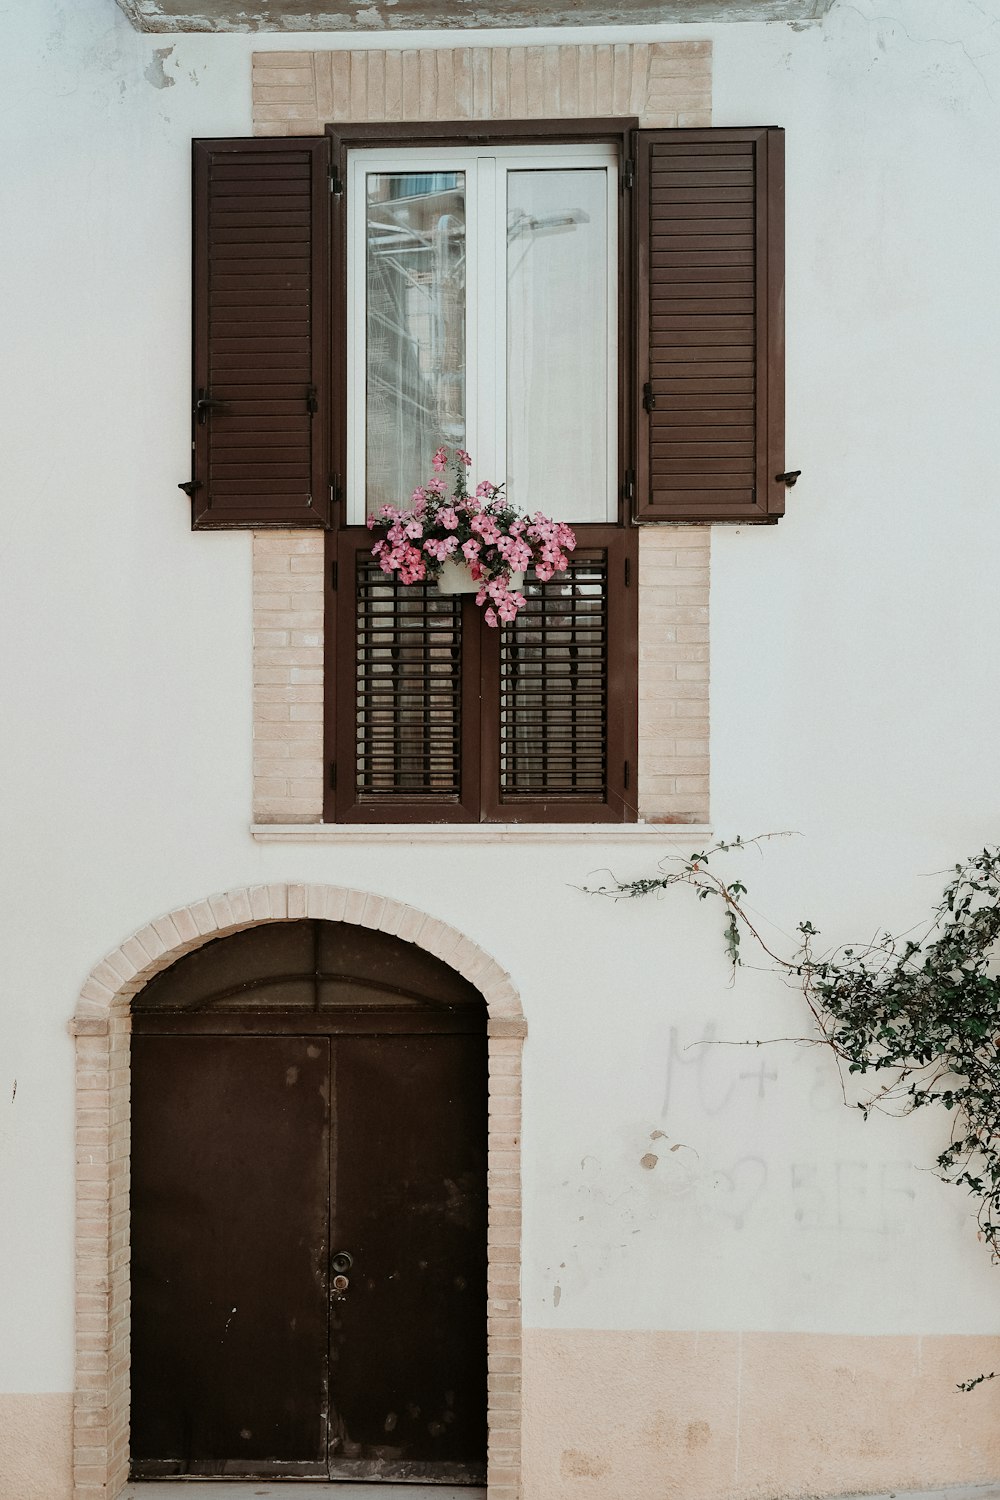 a window with shutters and flowers in a window box